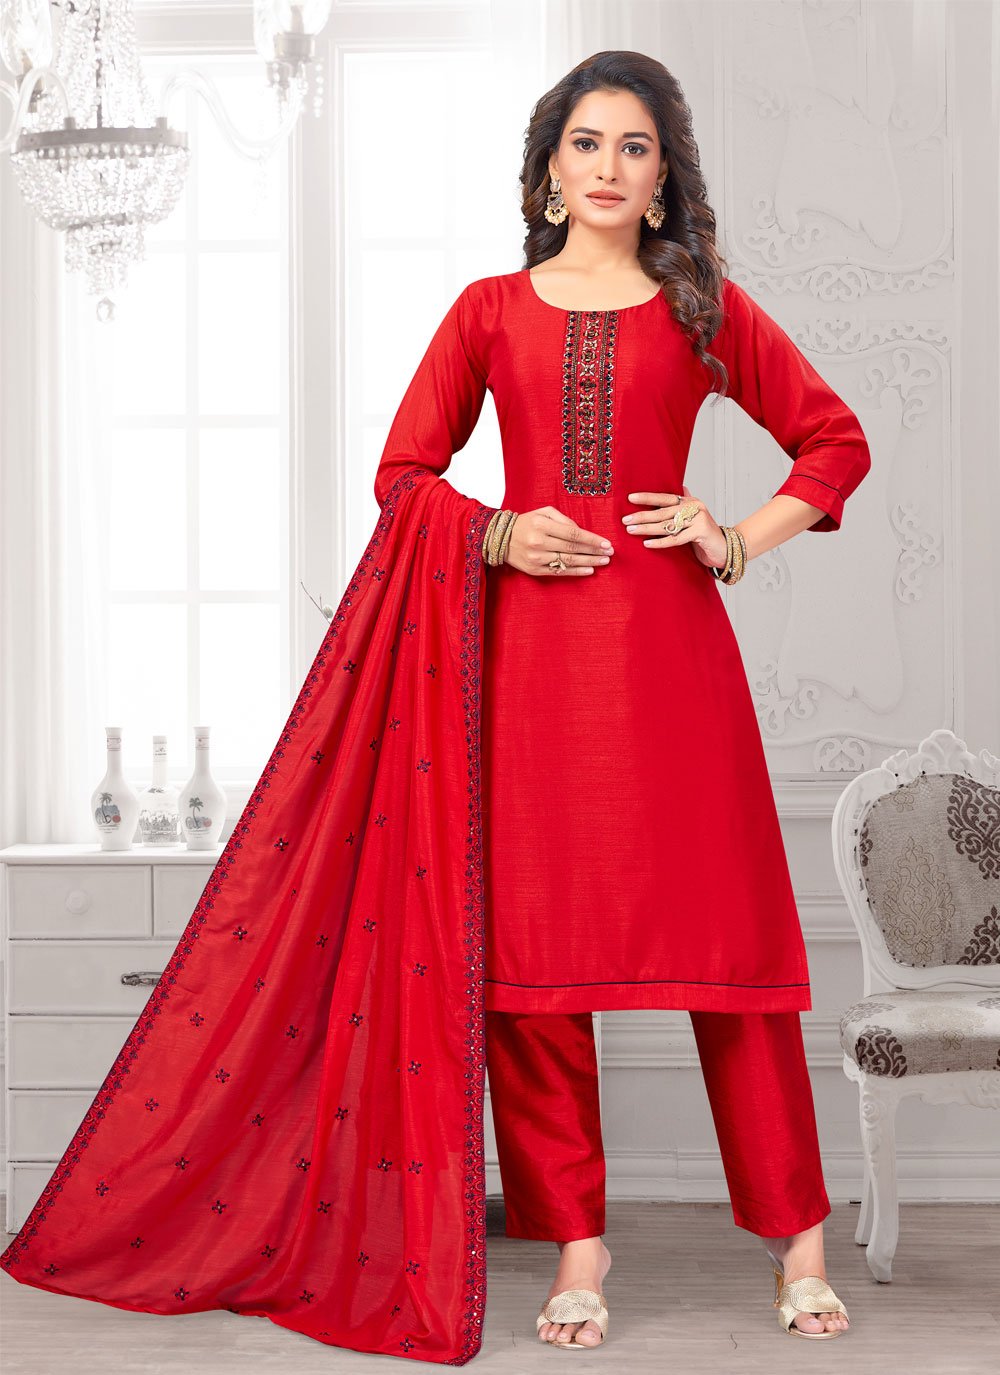 Designer Georgette With Heavy Embroidery Work Pakistani Suit Red Color R DN  528